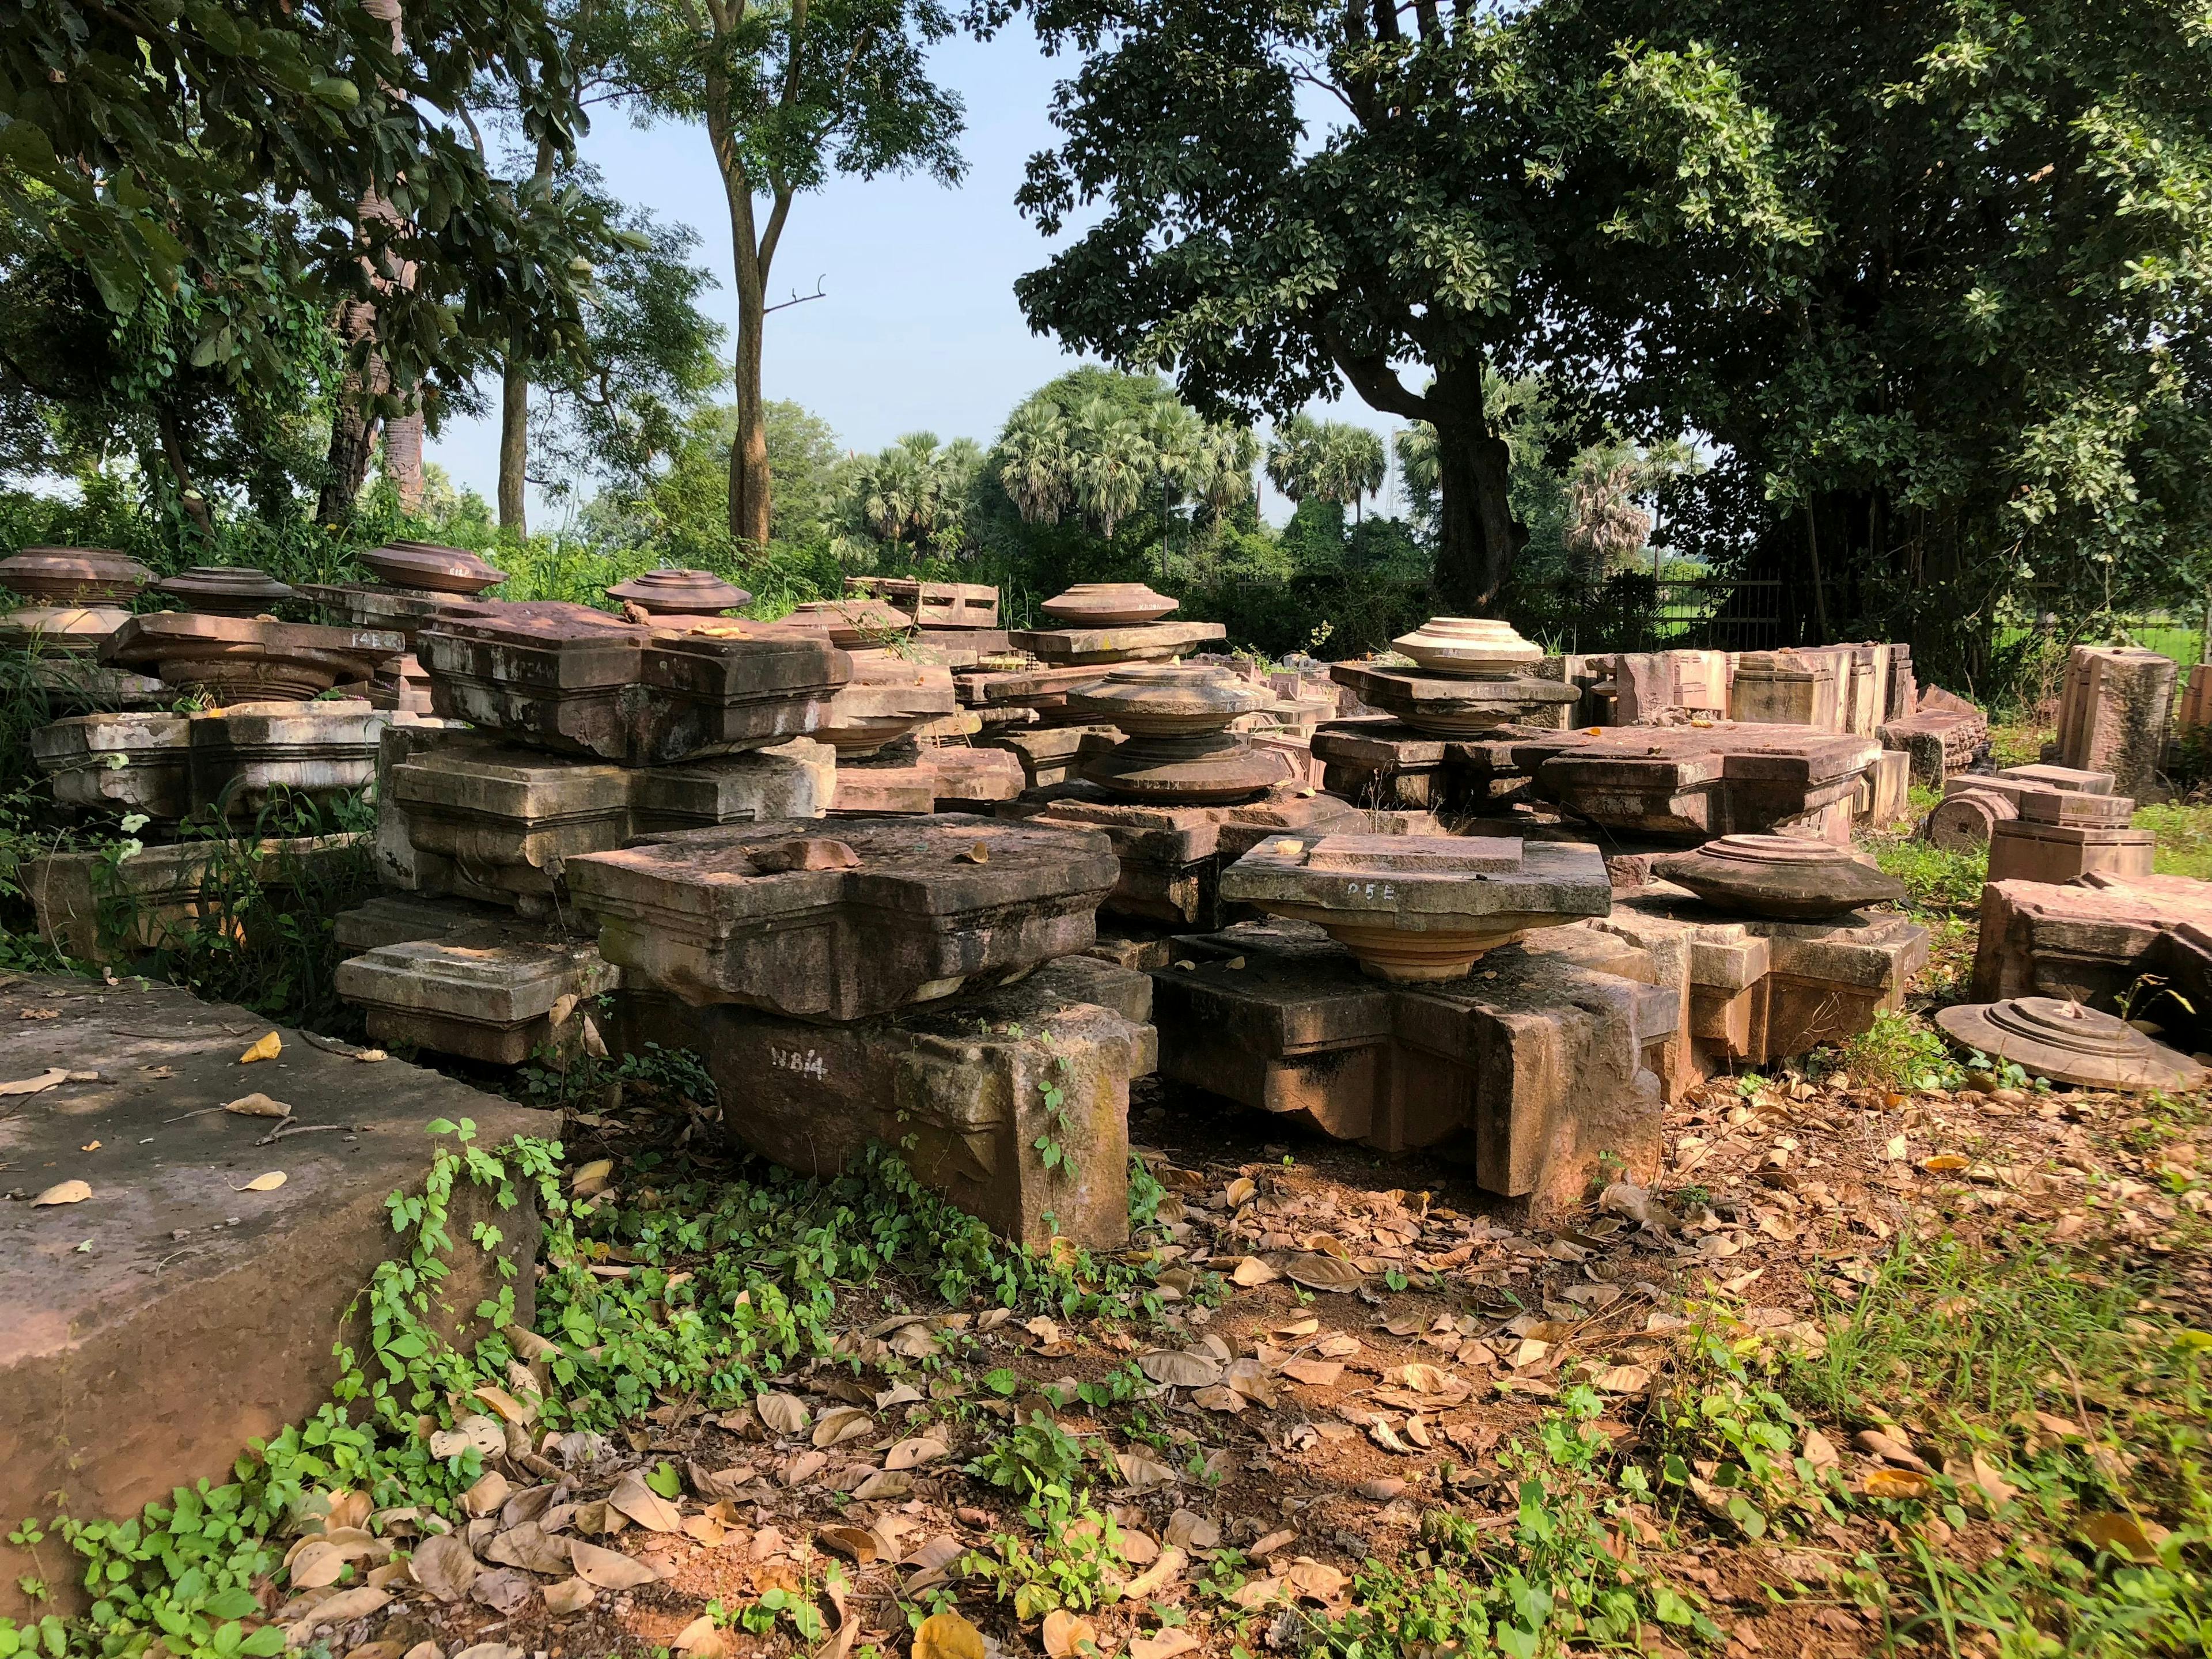 Remains around the temple